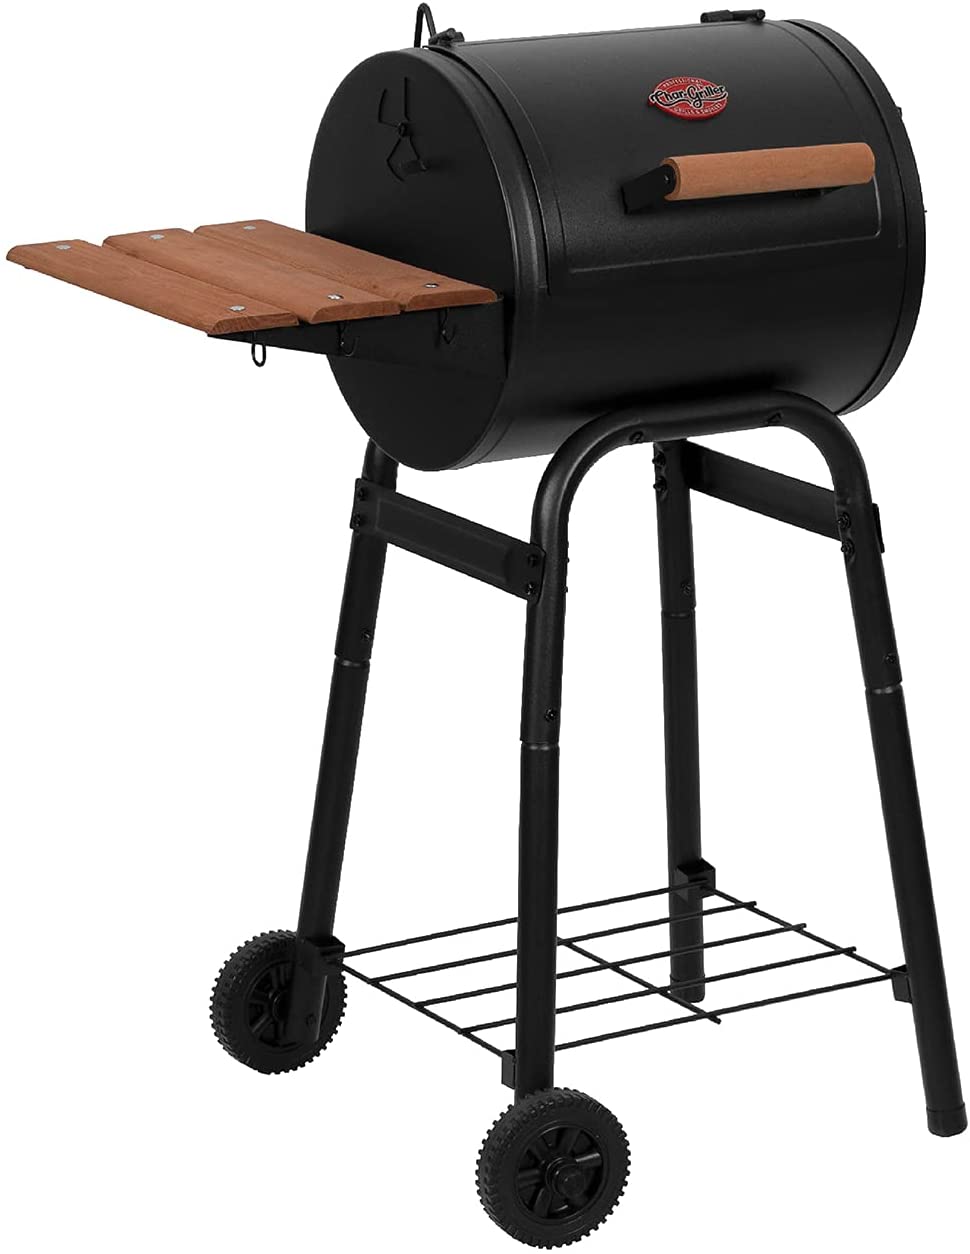 Char-Griller E1515 Patio Pro Barbecue Charcoal Grill, 44-Inch